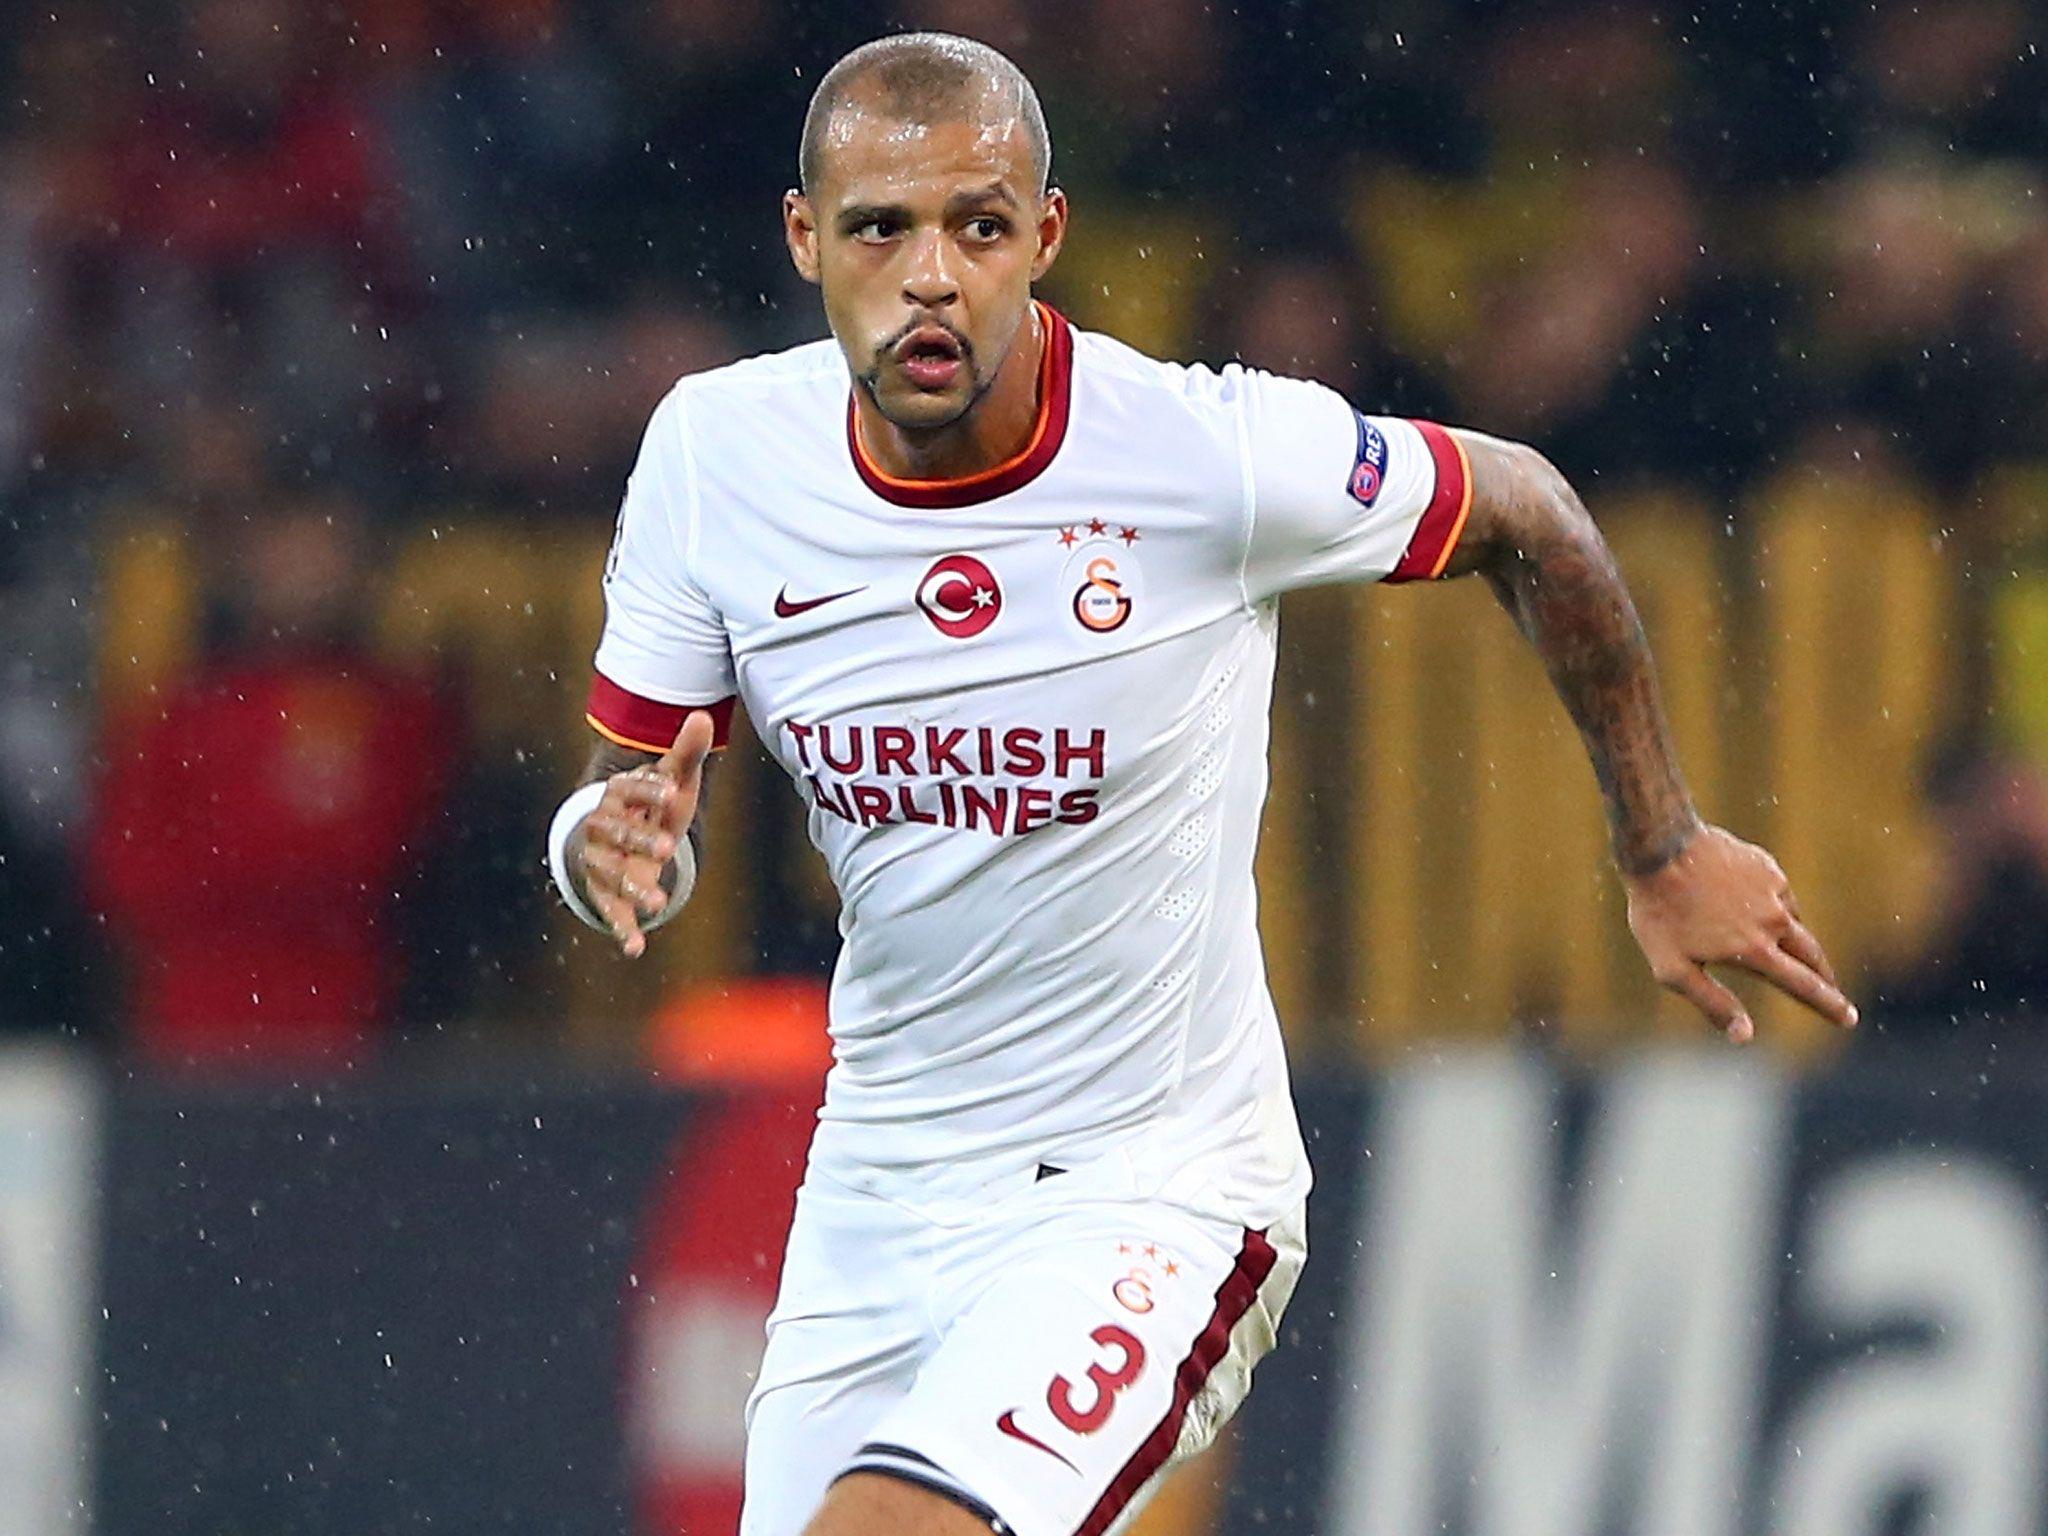 Felip Melo Z: Galatasaray midfielder launches new gaming app that